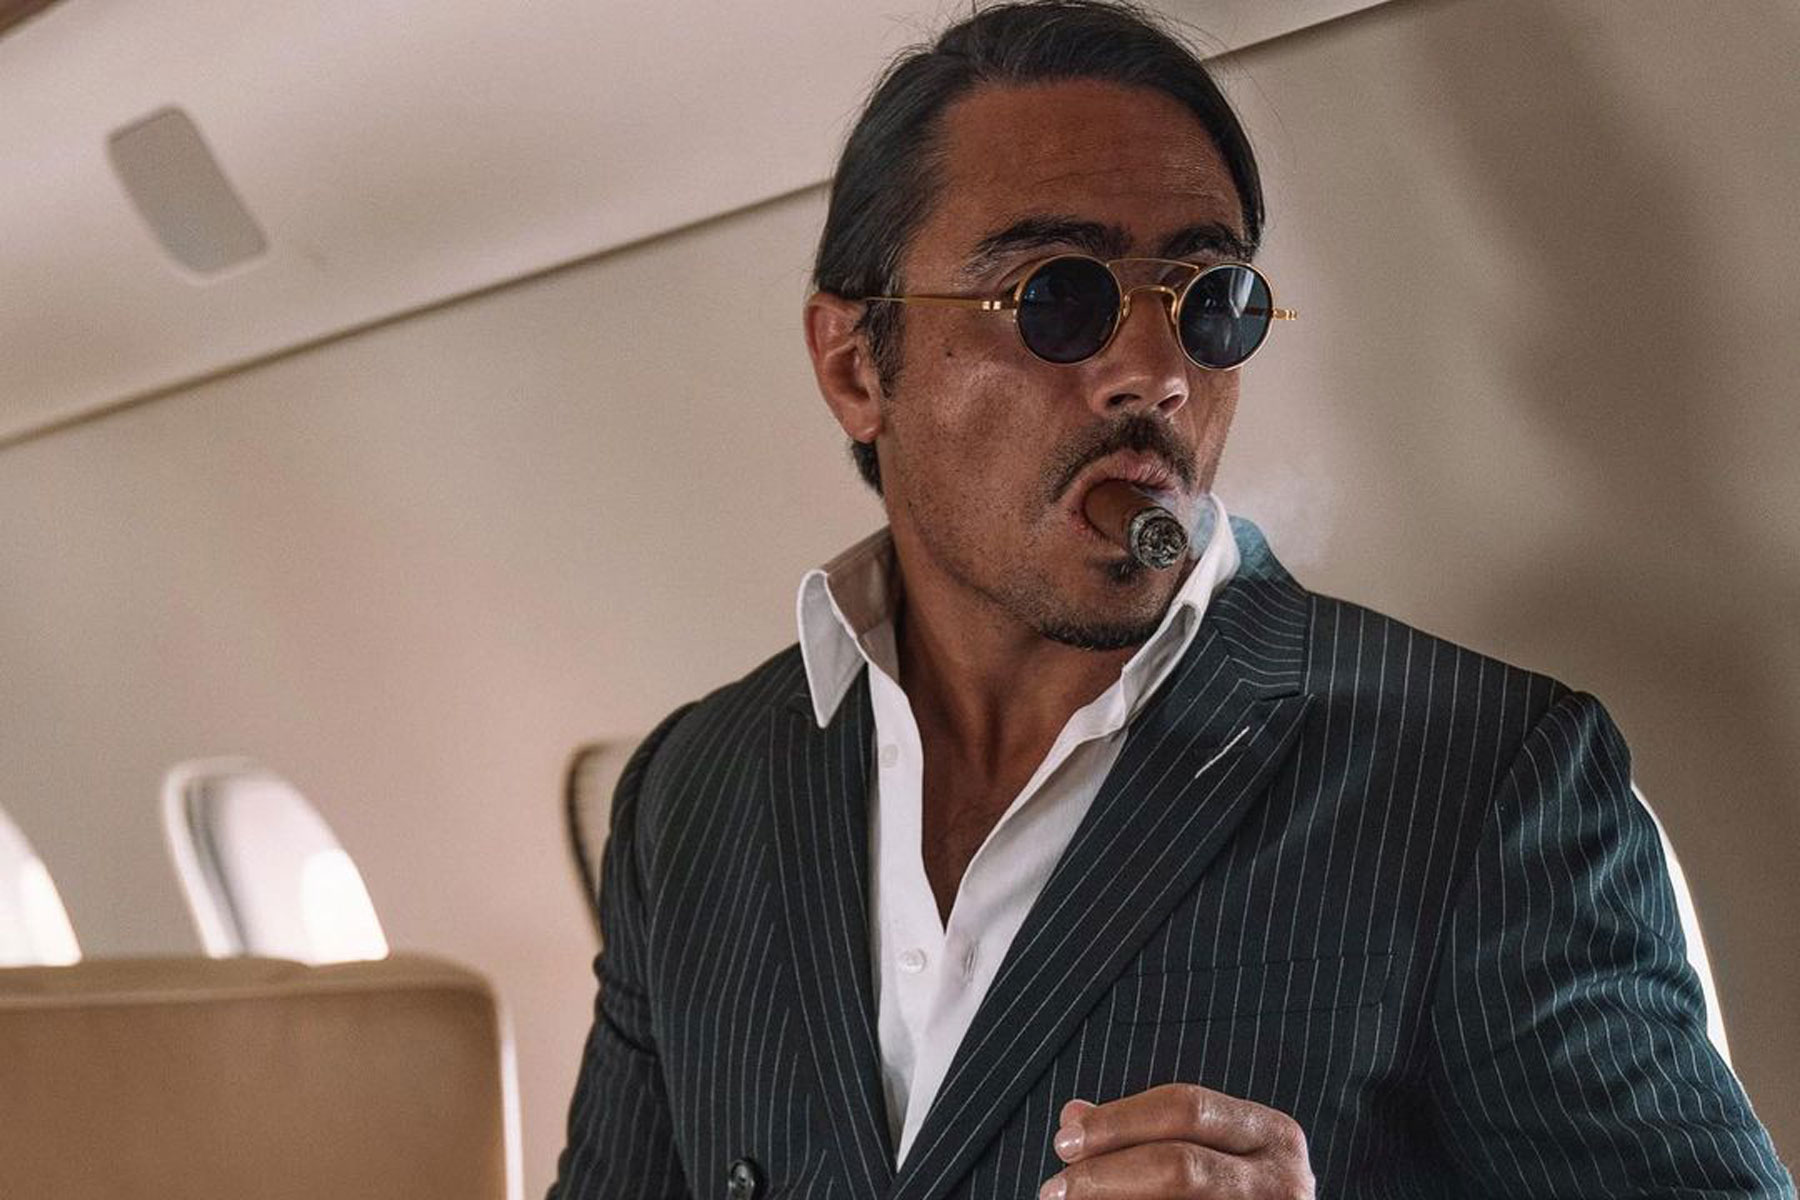 celebrity butcher 'salt bae' does the unthinkable on a flight...& gets away with it